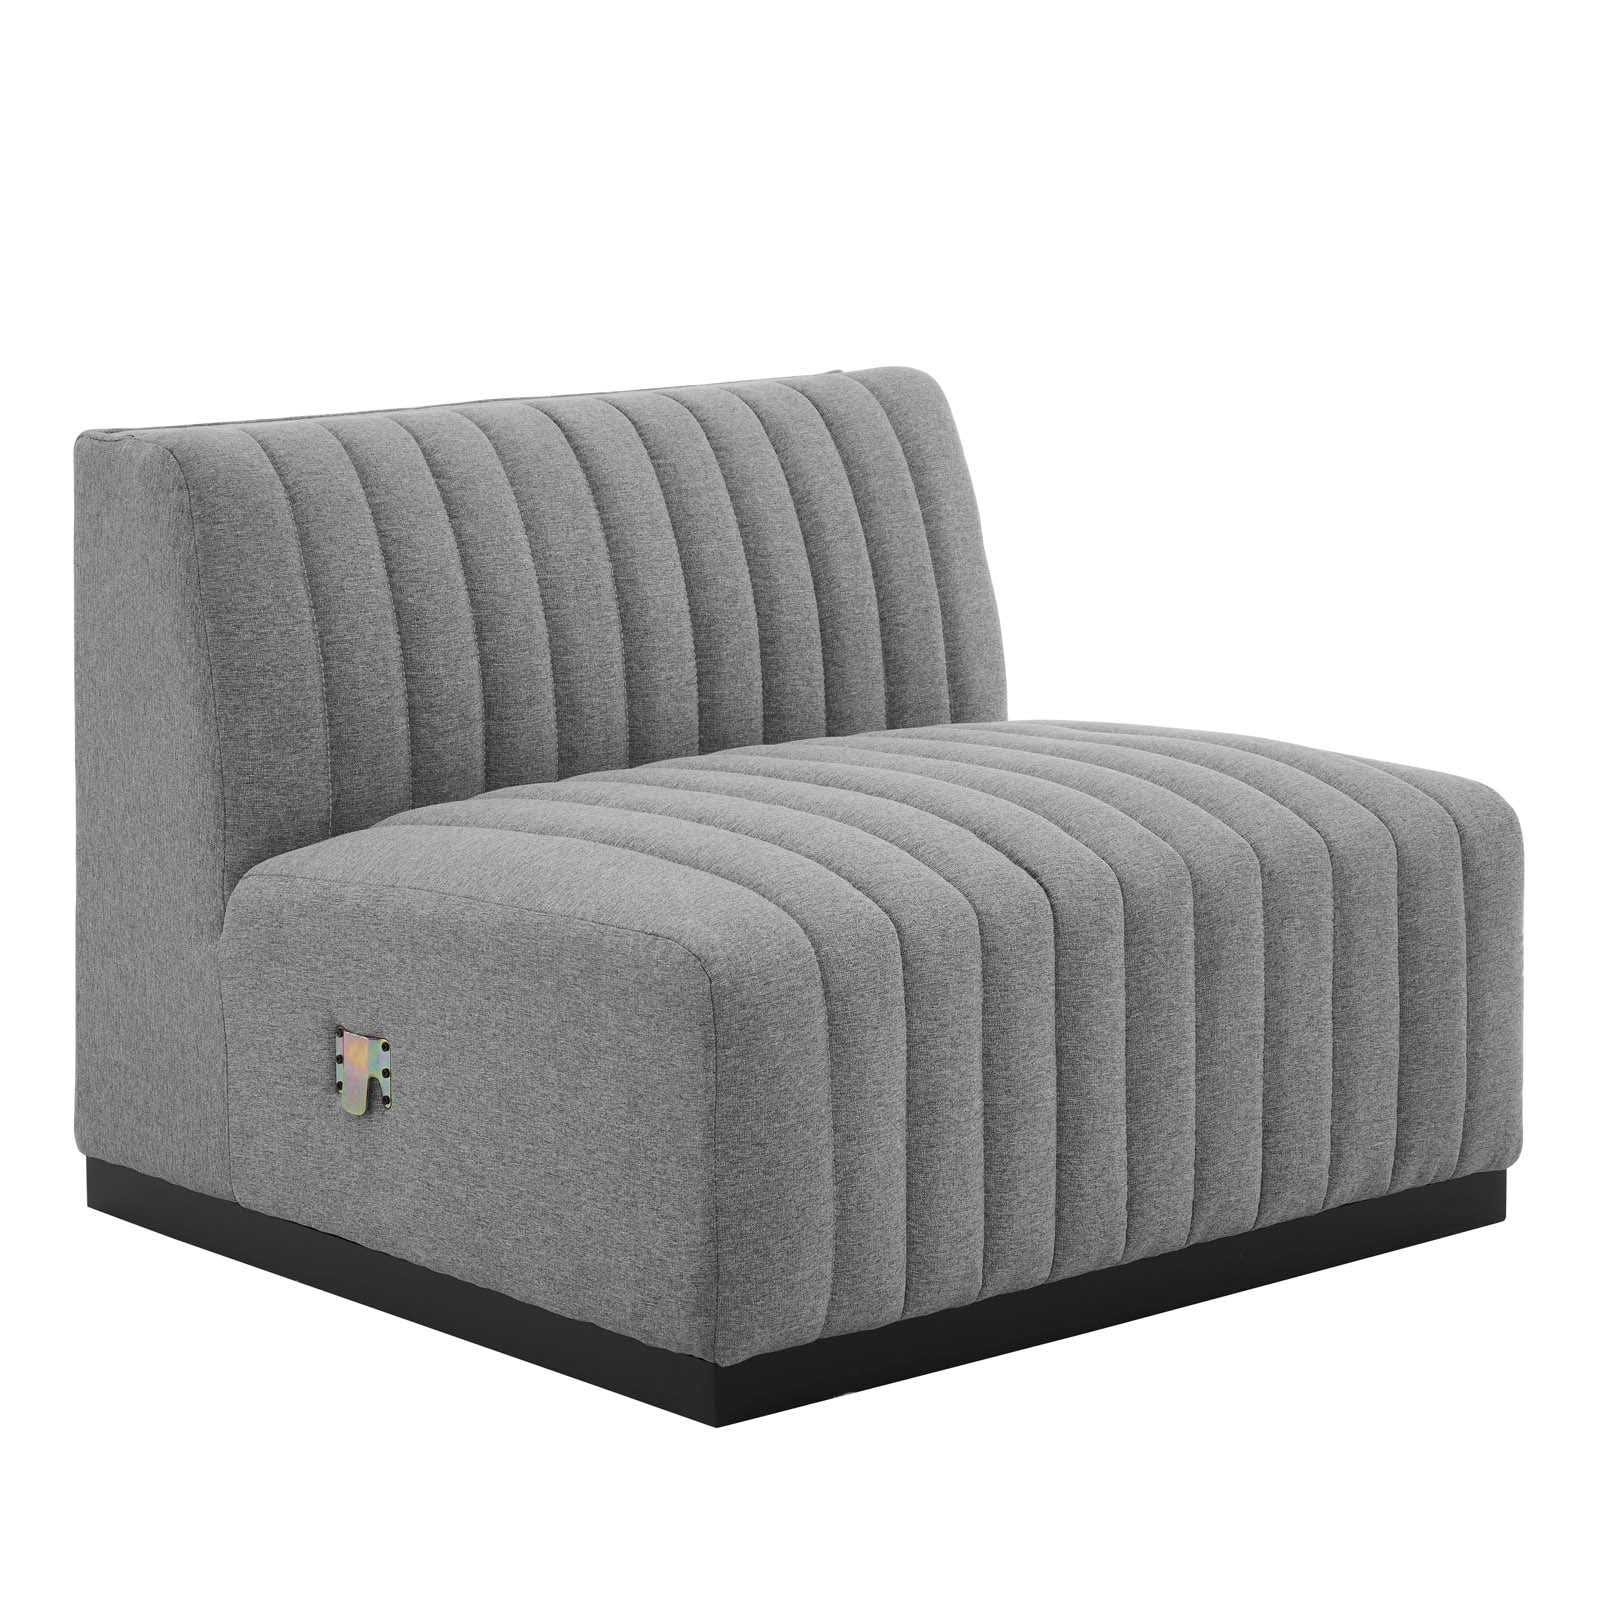 Modway Accent Chairs - Conjure Channel Tufted Upholstered Fabric Armless Chair Black Light Gray